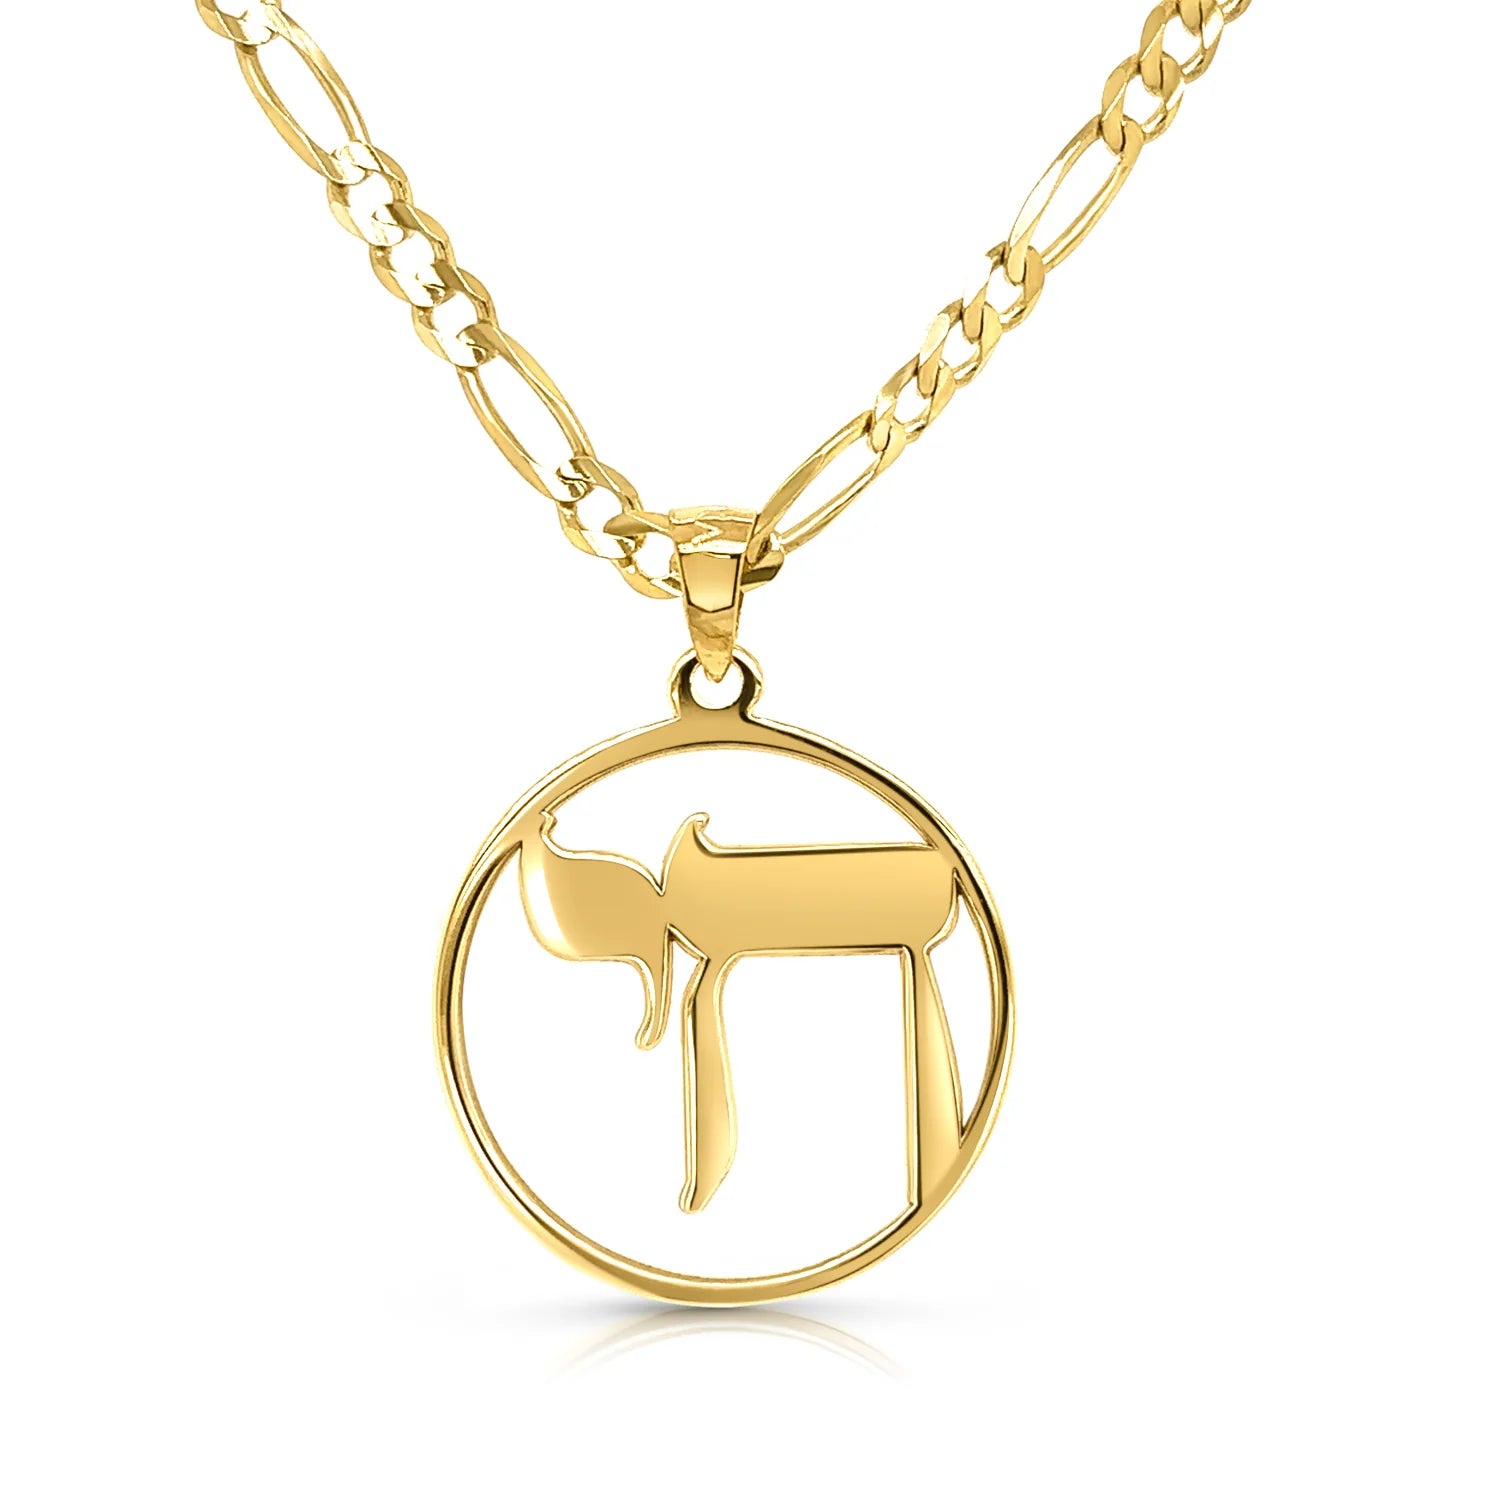 Gold round chai pendant on a white background